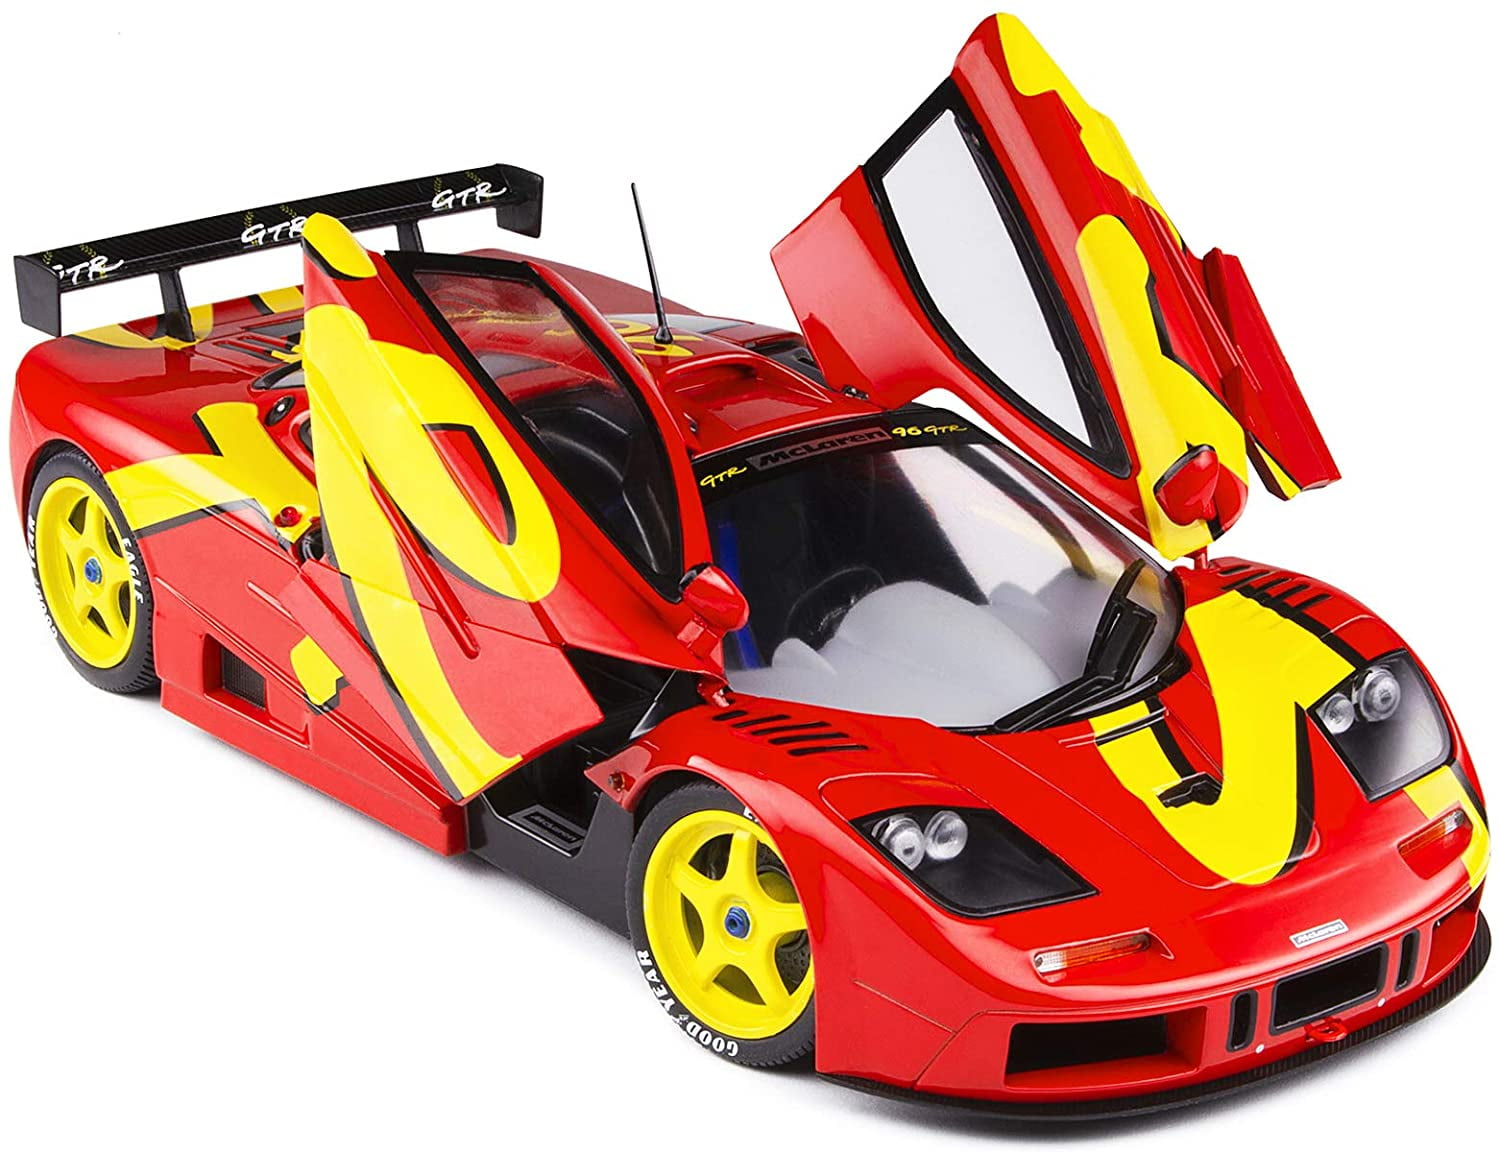 Solido 1996 McLaren F1 GTR Short Tail Launch Livery Red 1/18 Diecast S1804102 for sale online